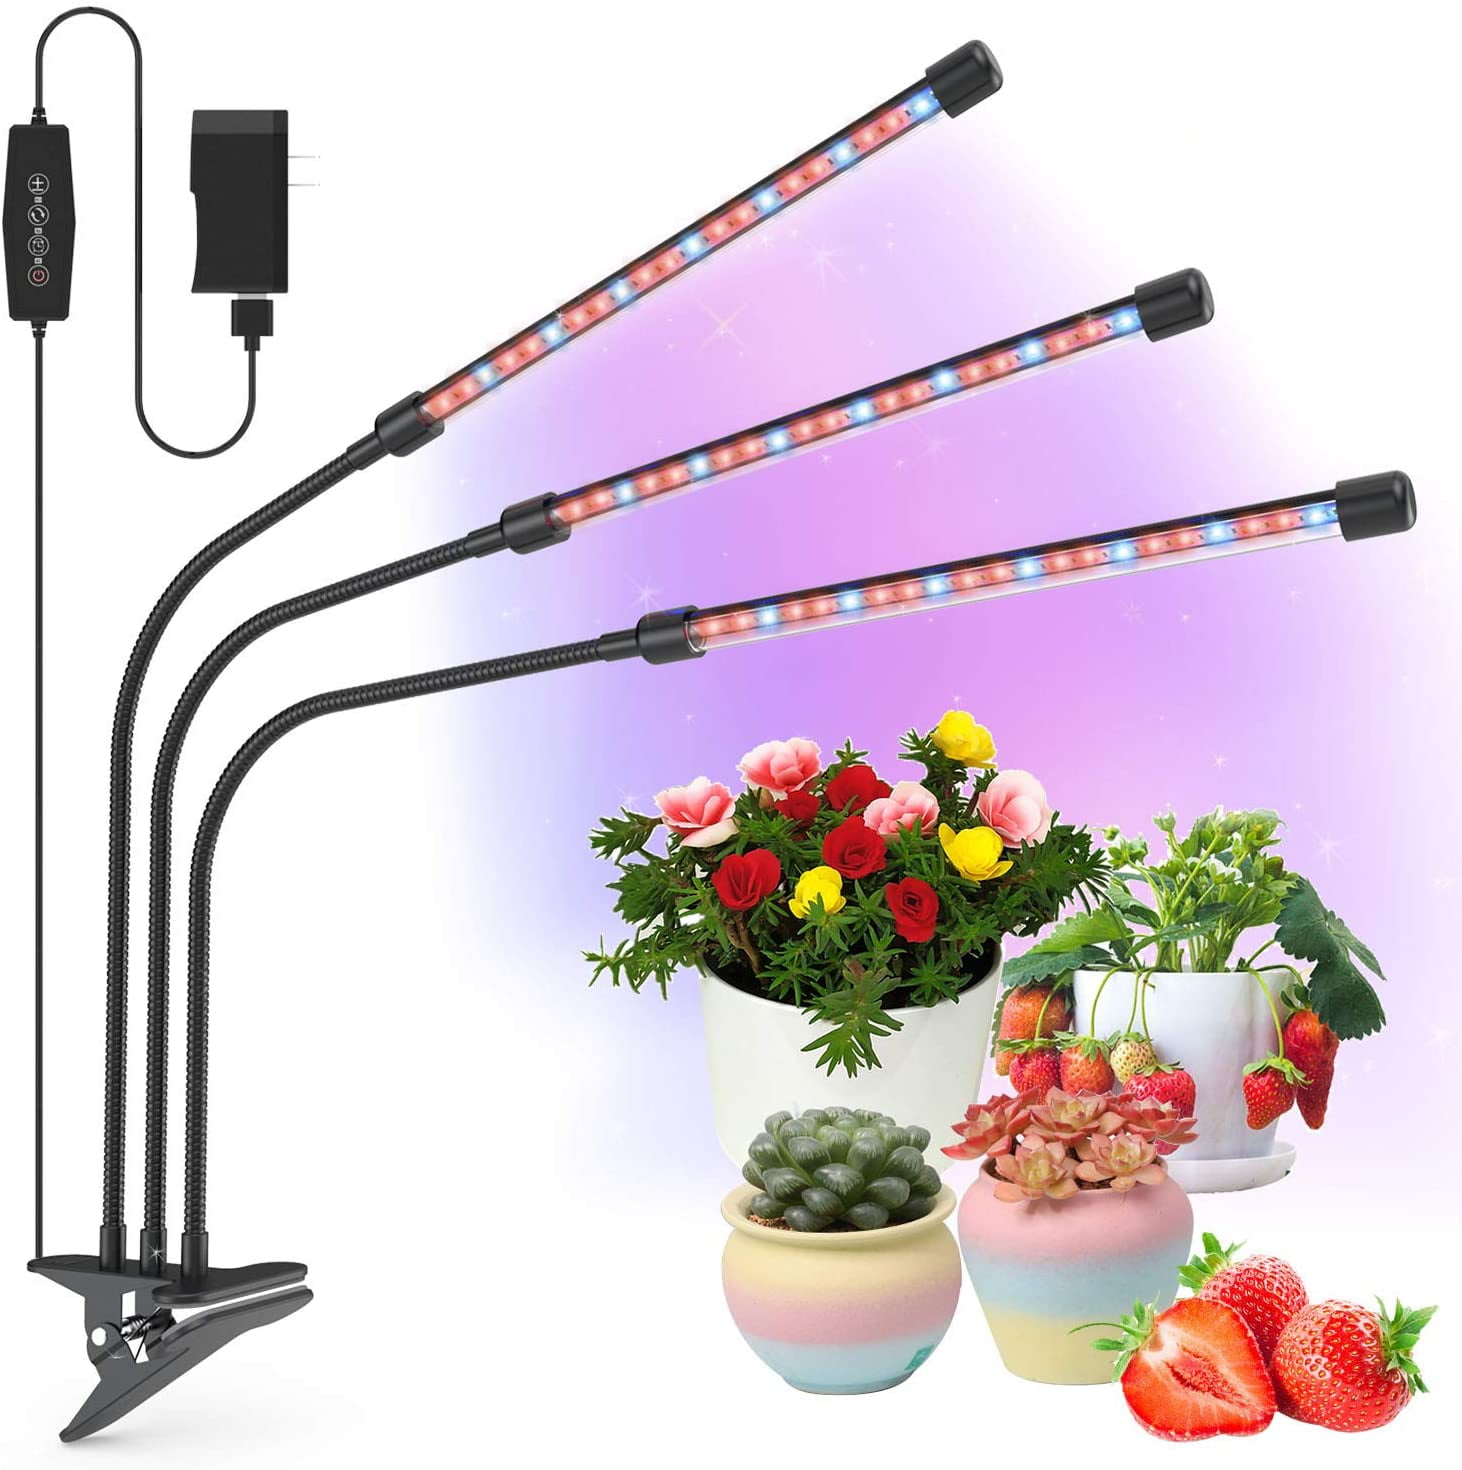 Dimmable Details about   BLOOMSPECT S1000 LED Grow Light for Indoor Plants Full S1000 